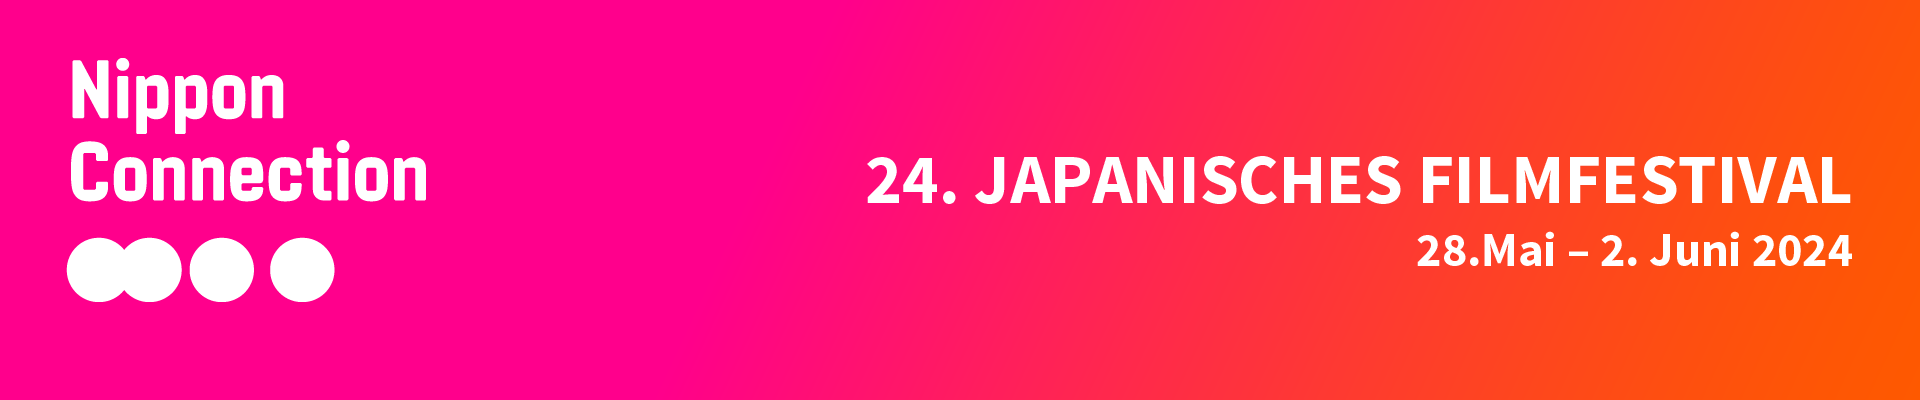 Nippon Connection – 24. Japanisches Filmfestival